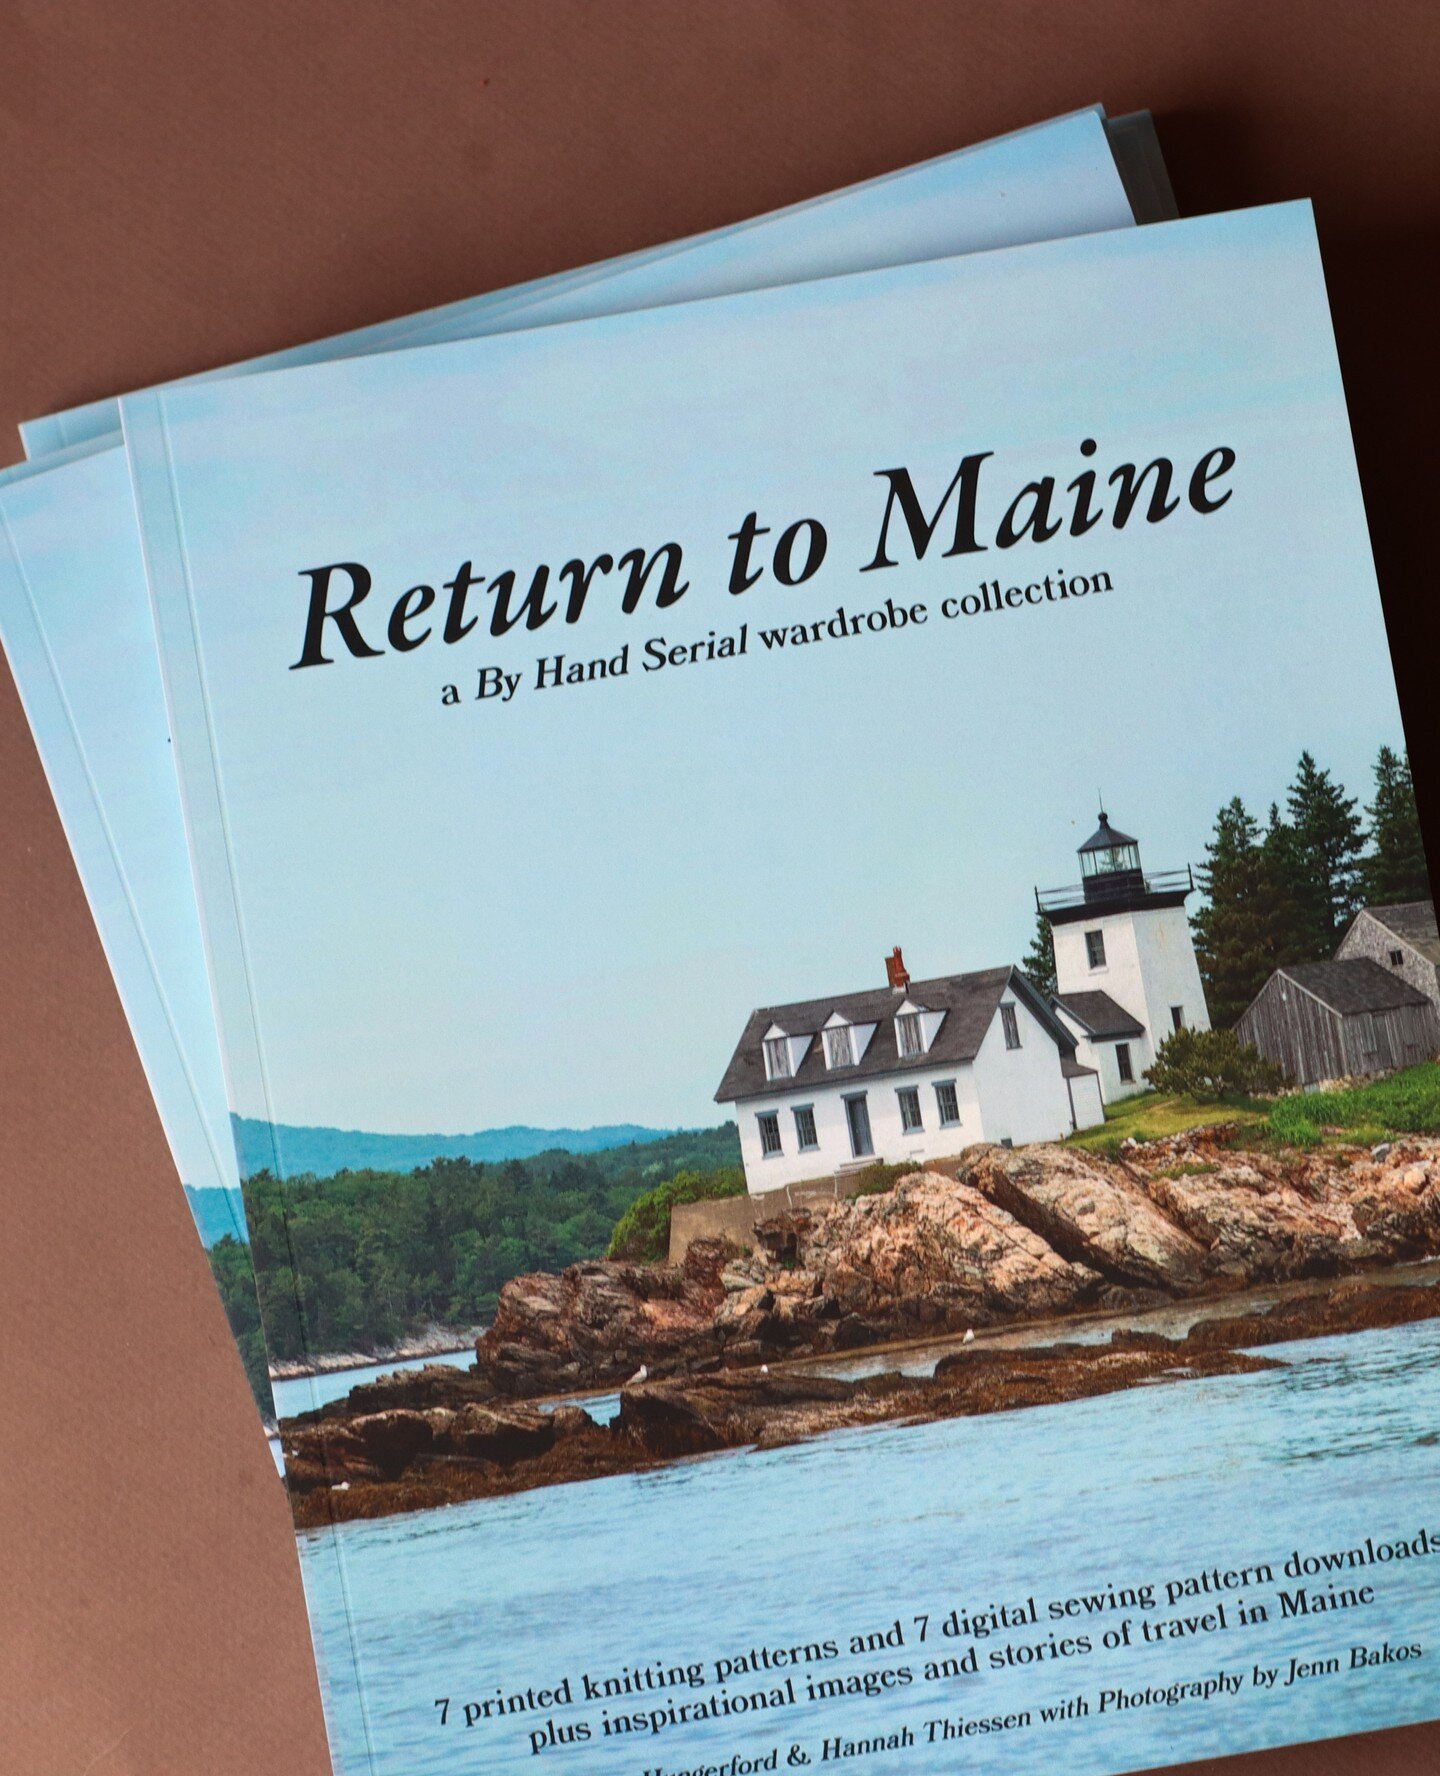 Last chance! Today I've listed the last of our print books for sale in the shop--including the last few issues of our Return to Maine book at a discounted price (for the first time ever). ⁠
⁠
If you want one, grab it now! The same goes for our Rhode 